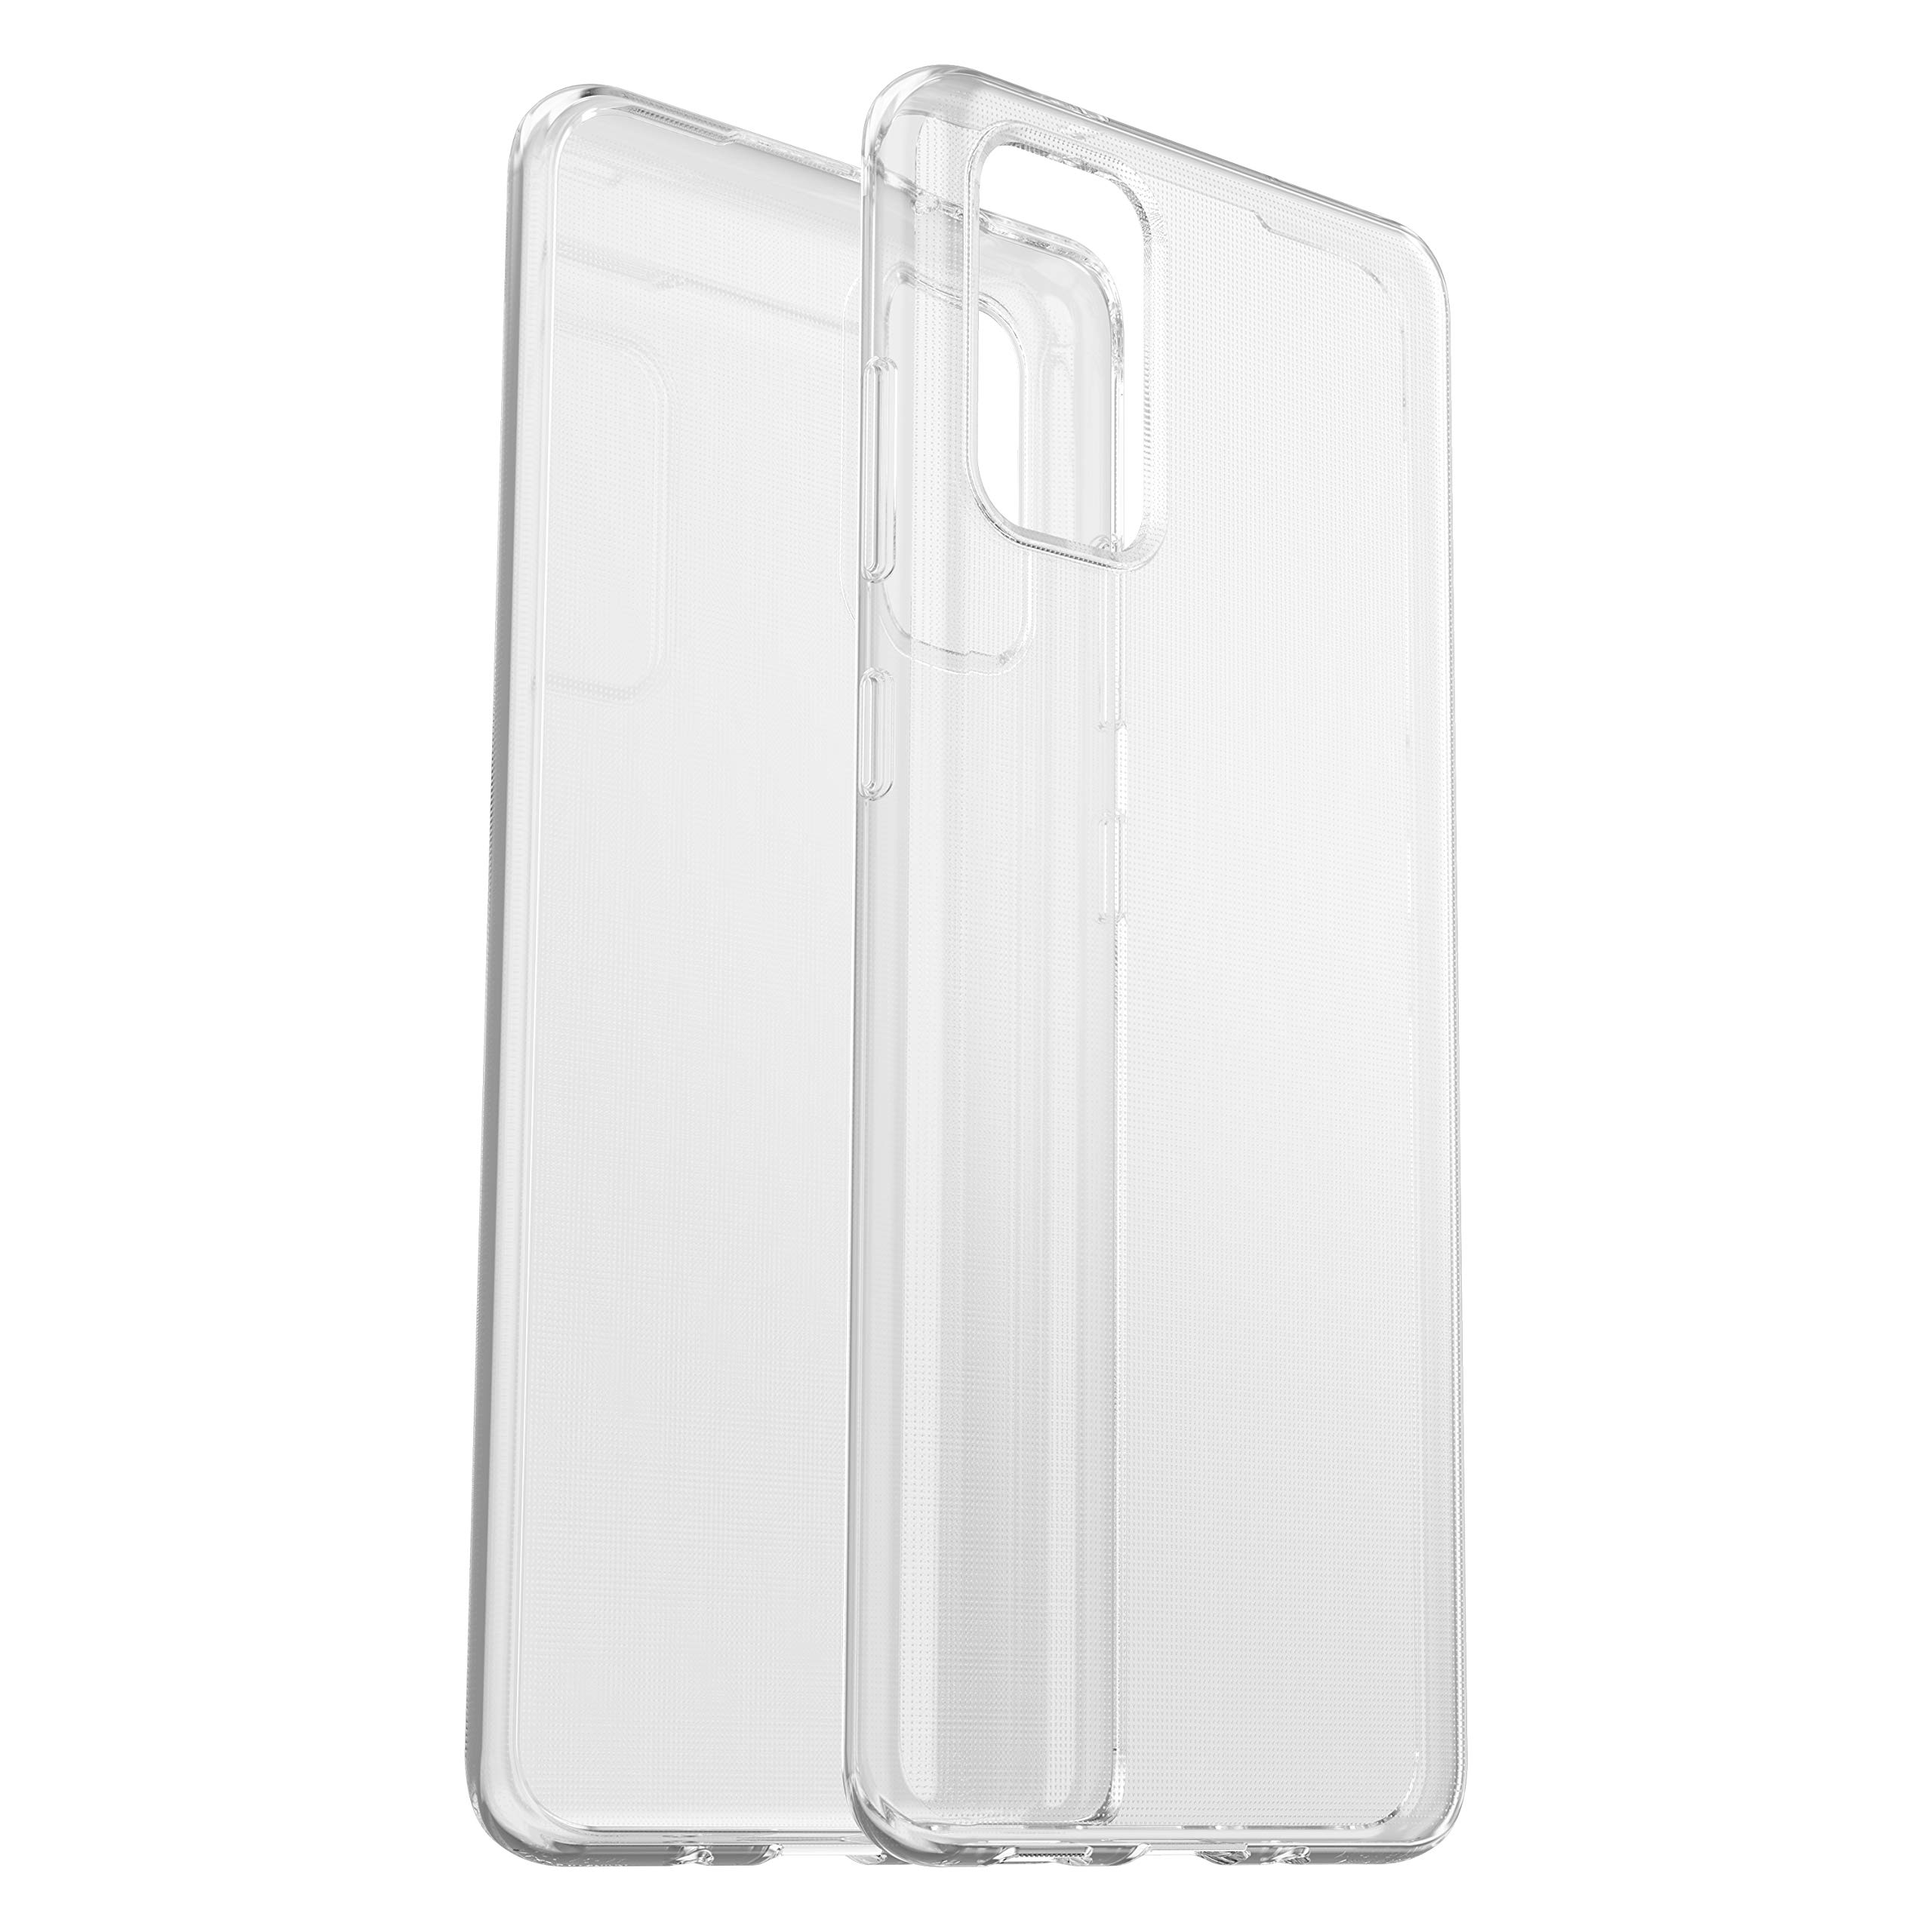 OTTERBOX CLEARLY PROTECTED SKIN